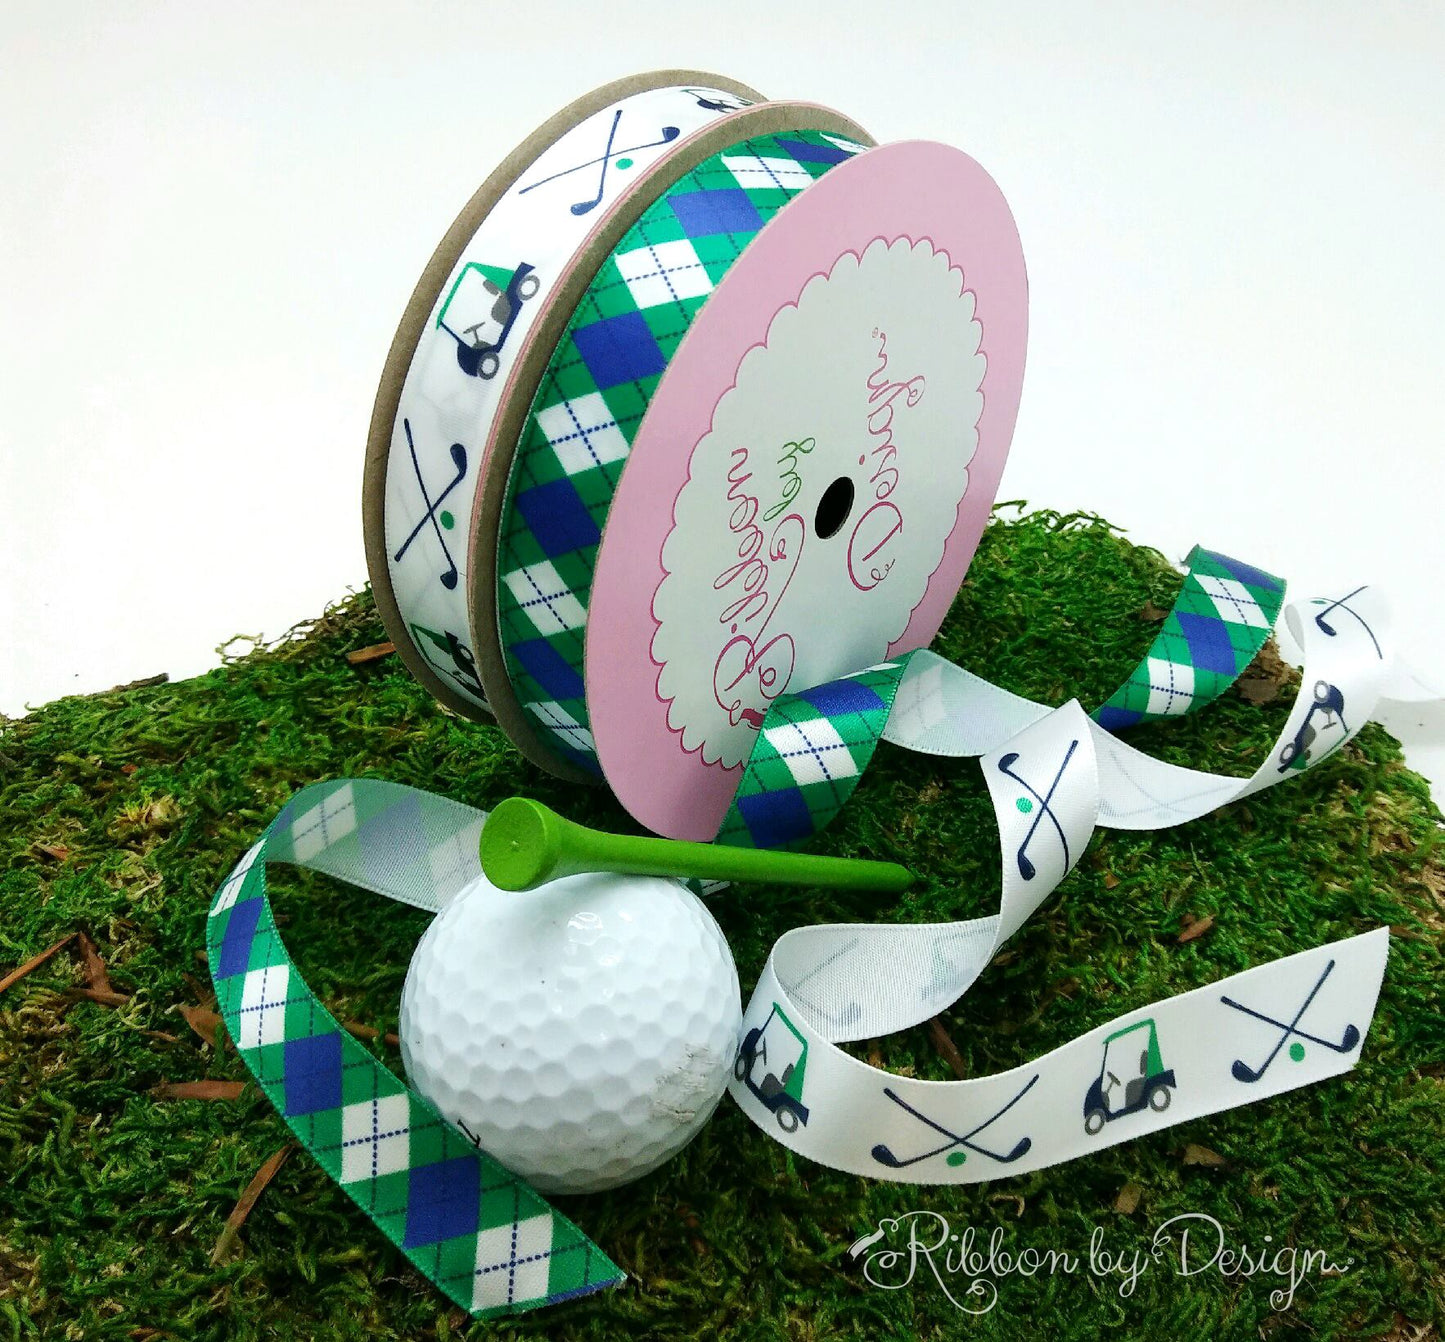 Argyle Ribbon in Blue and Green printed on 5/8" White Single Face Satin Ribbon